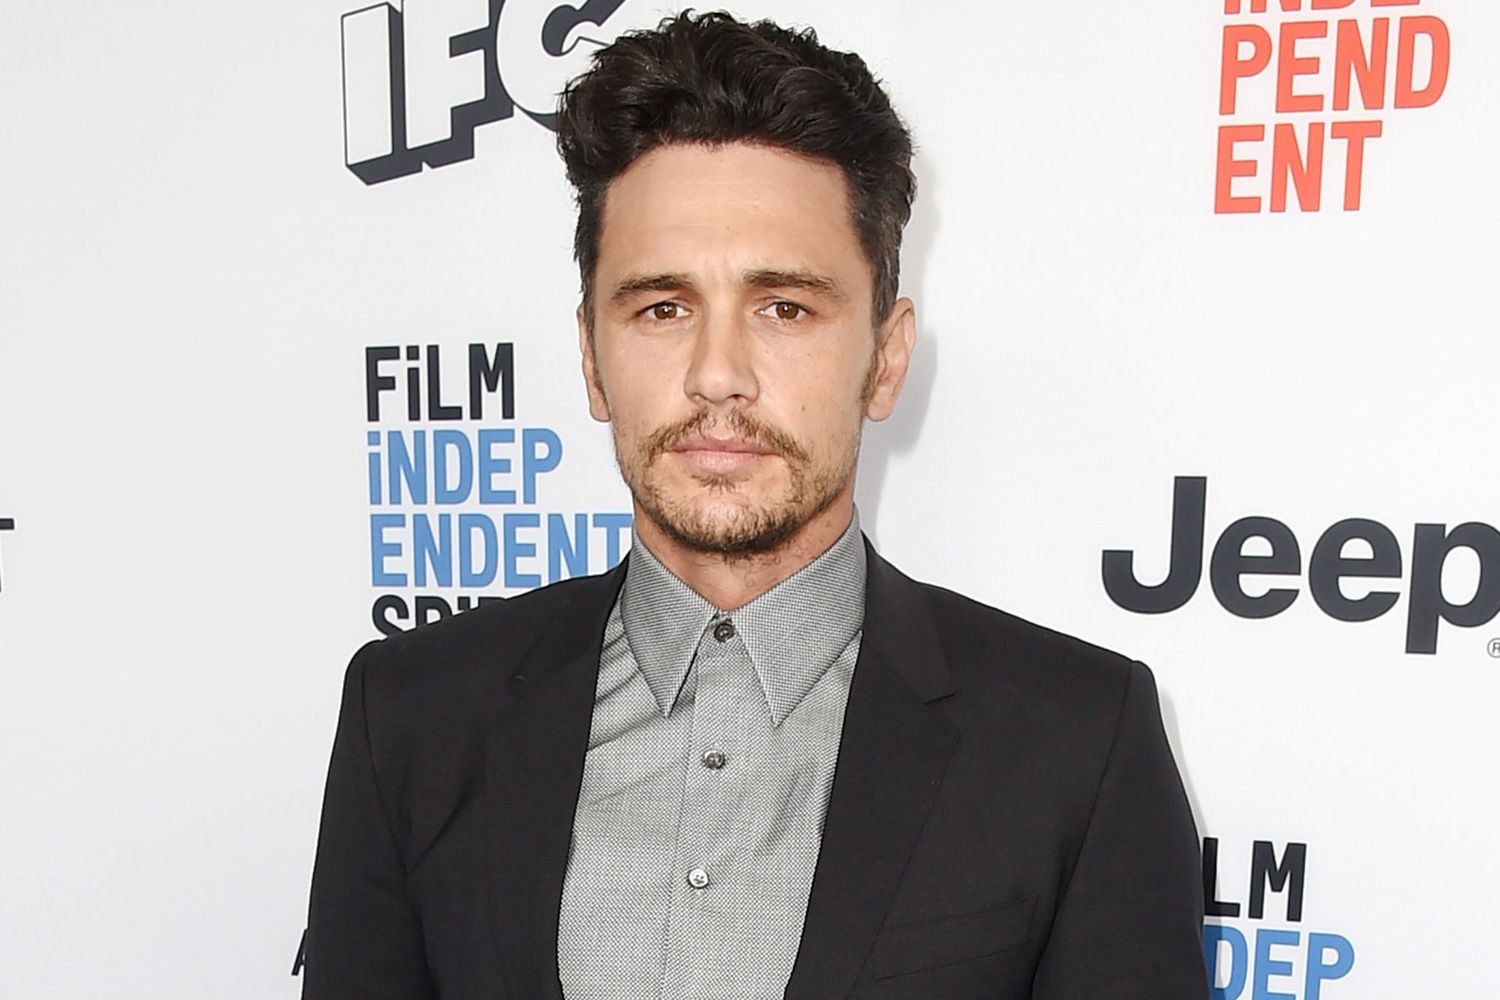 James Franco at an event